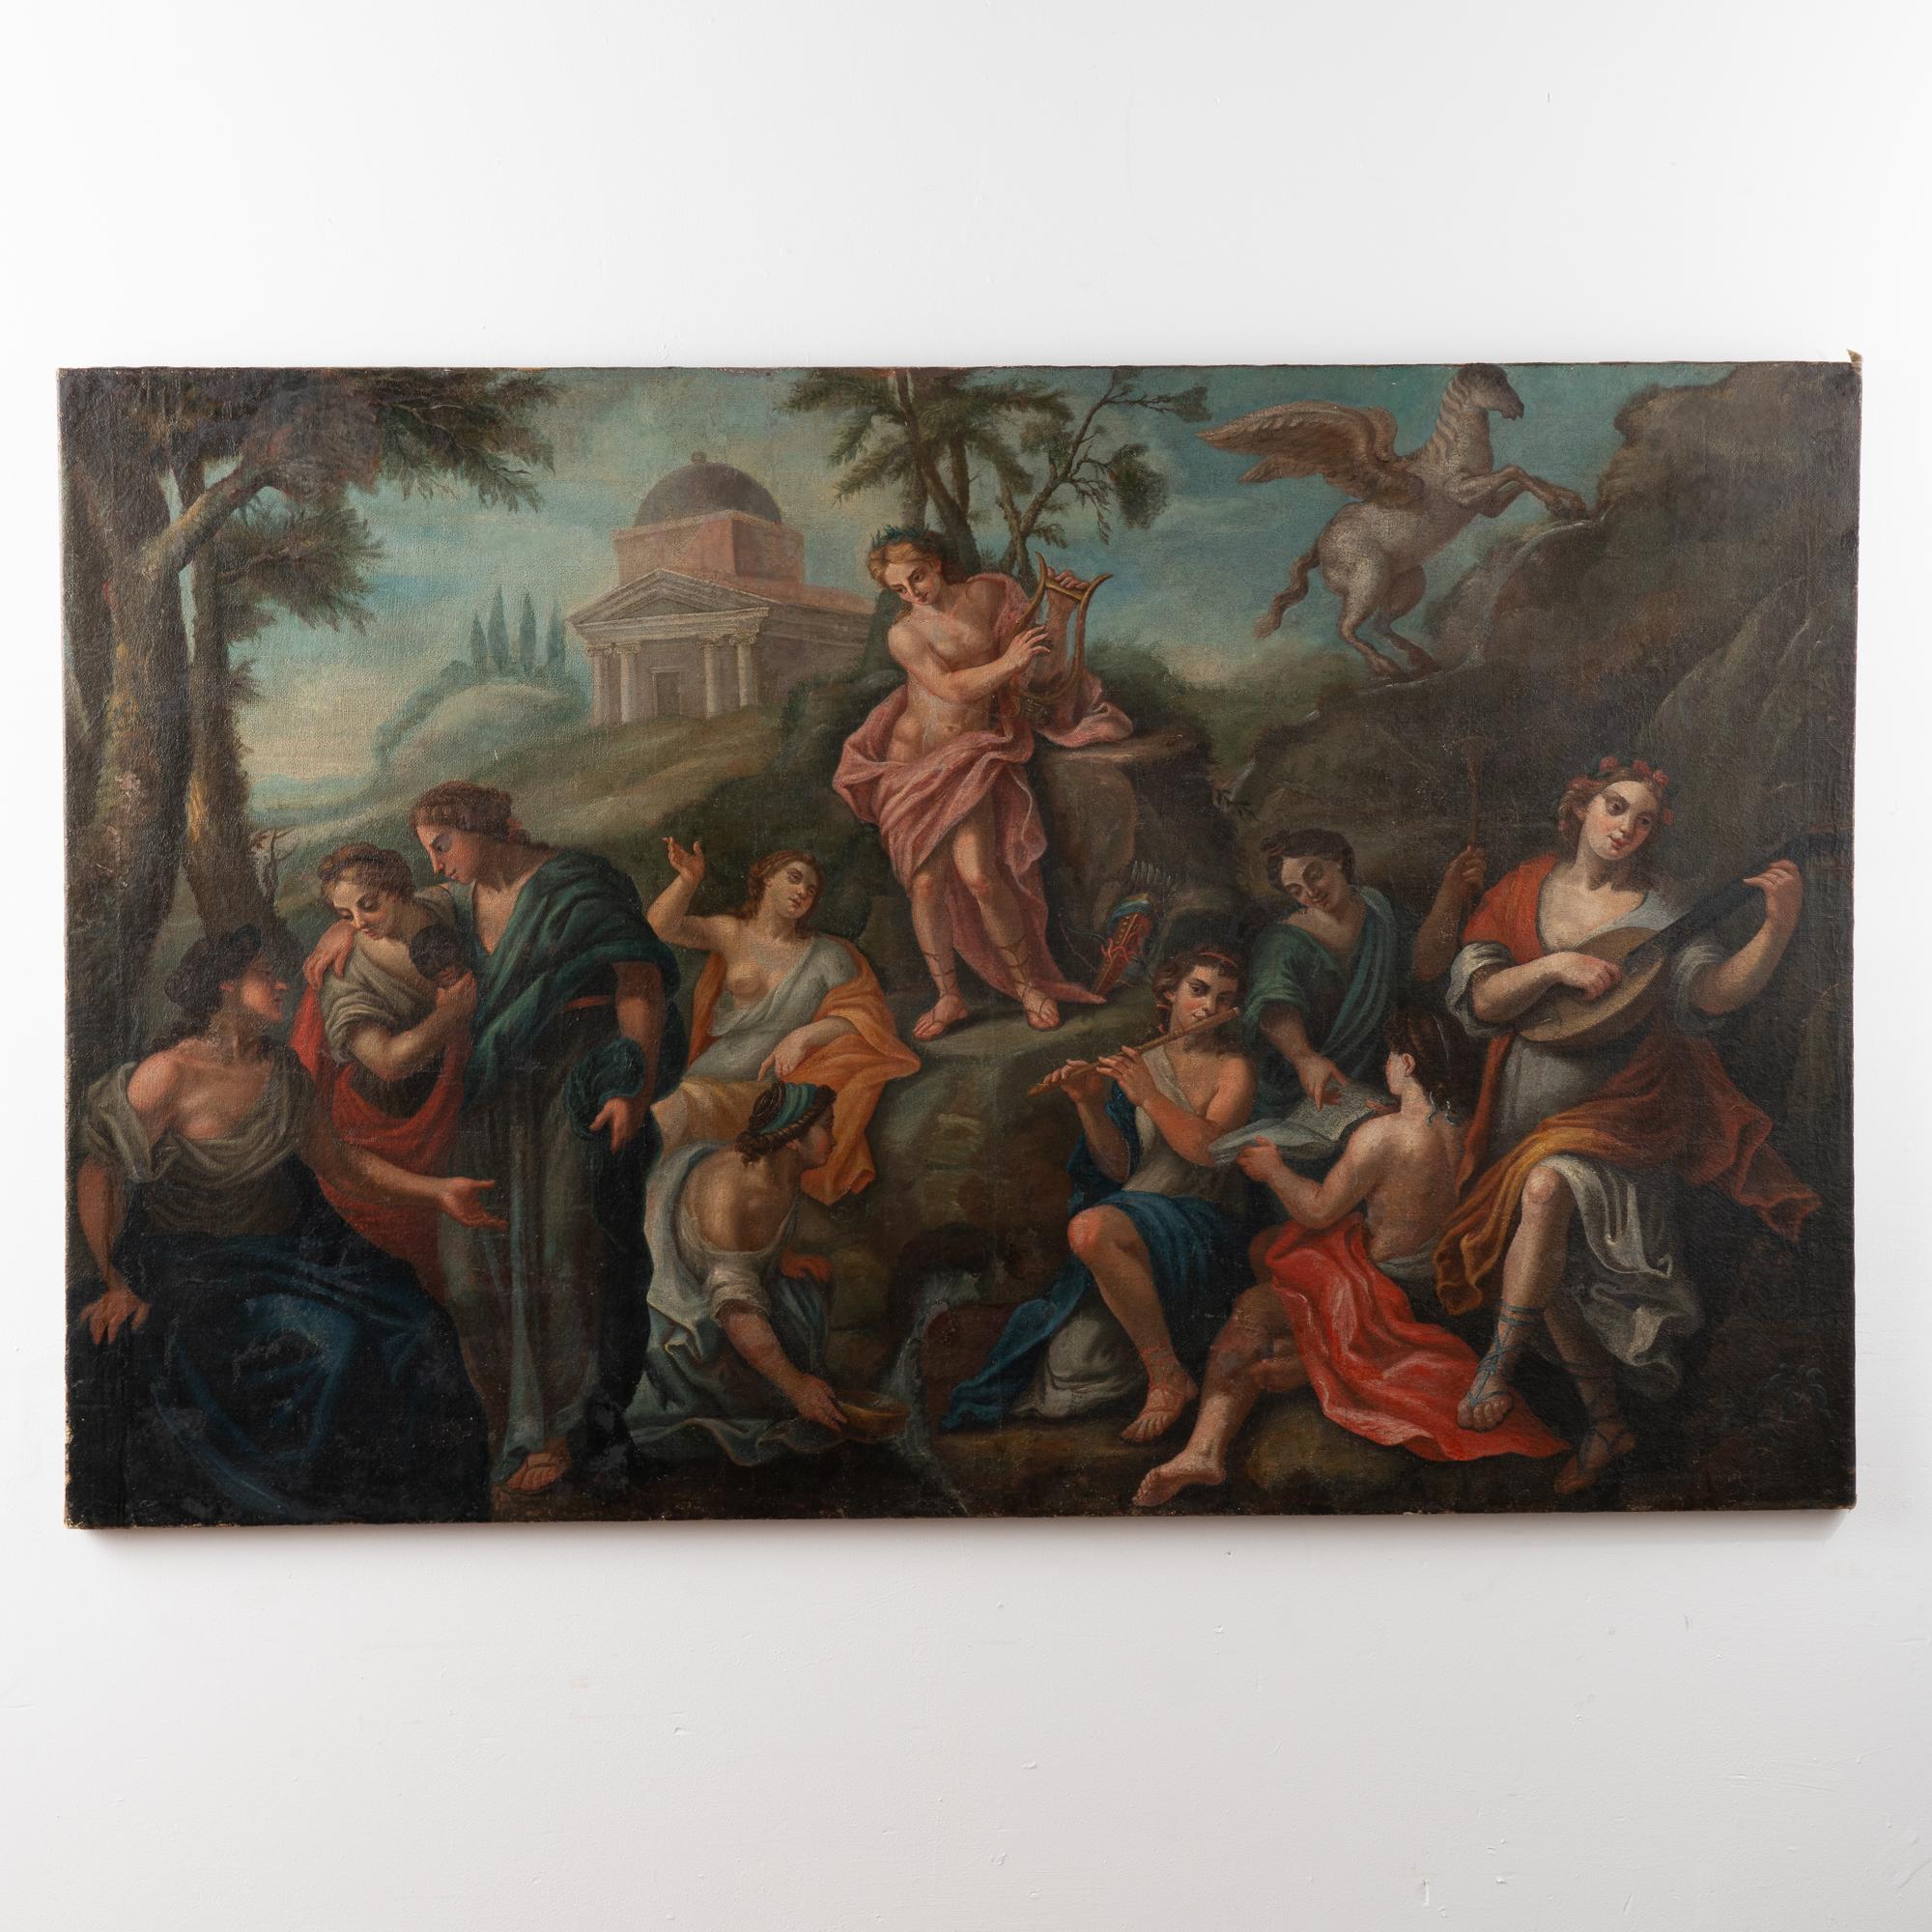 Original large oil on canvas allegorical scene from Italy with vivid colors. Note the Pegasus, ten figures, and use of lute, lyre and flute. 
Condition: Age related craquelure throughout, minor peelings, loss etc. Canvas may benefit from light